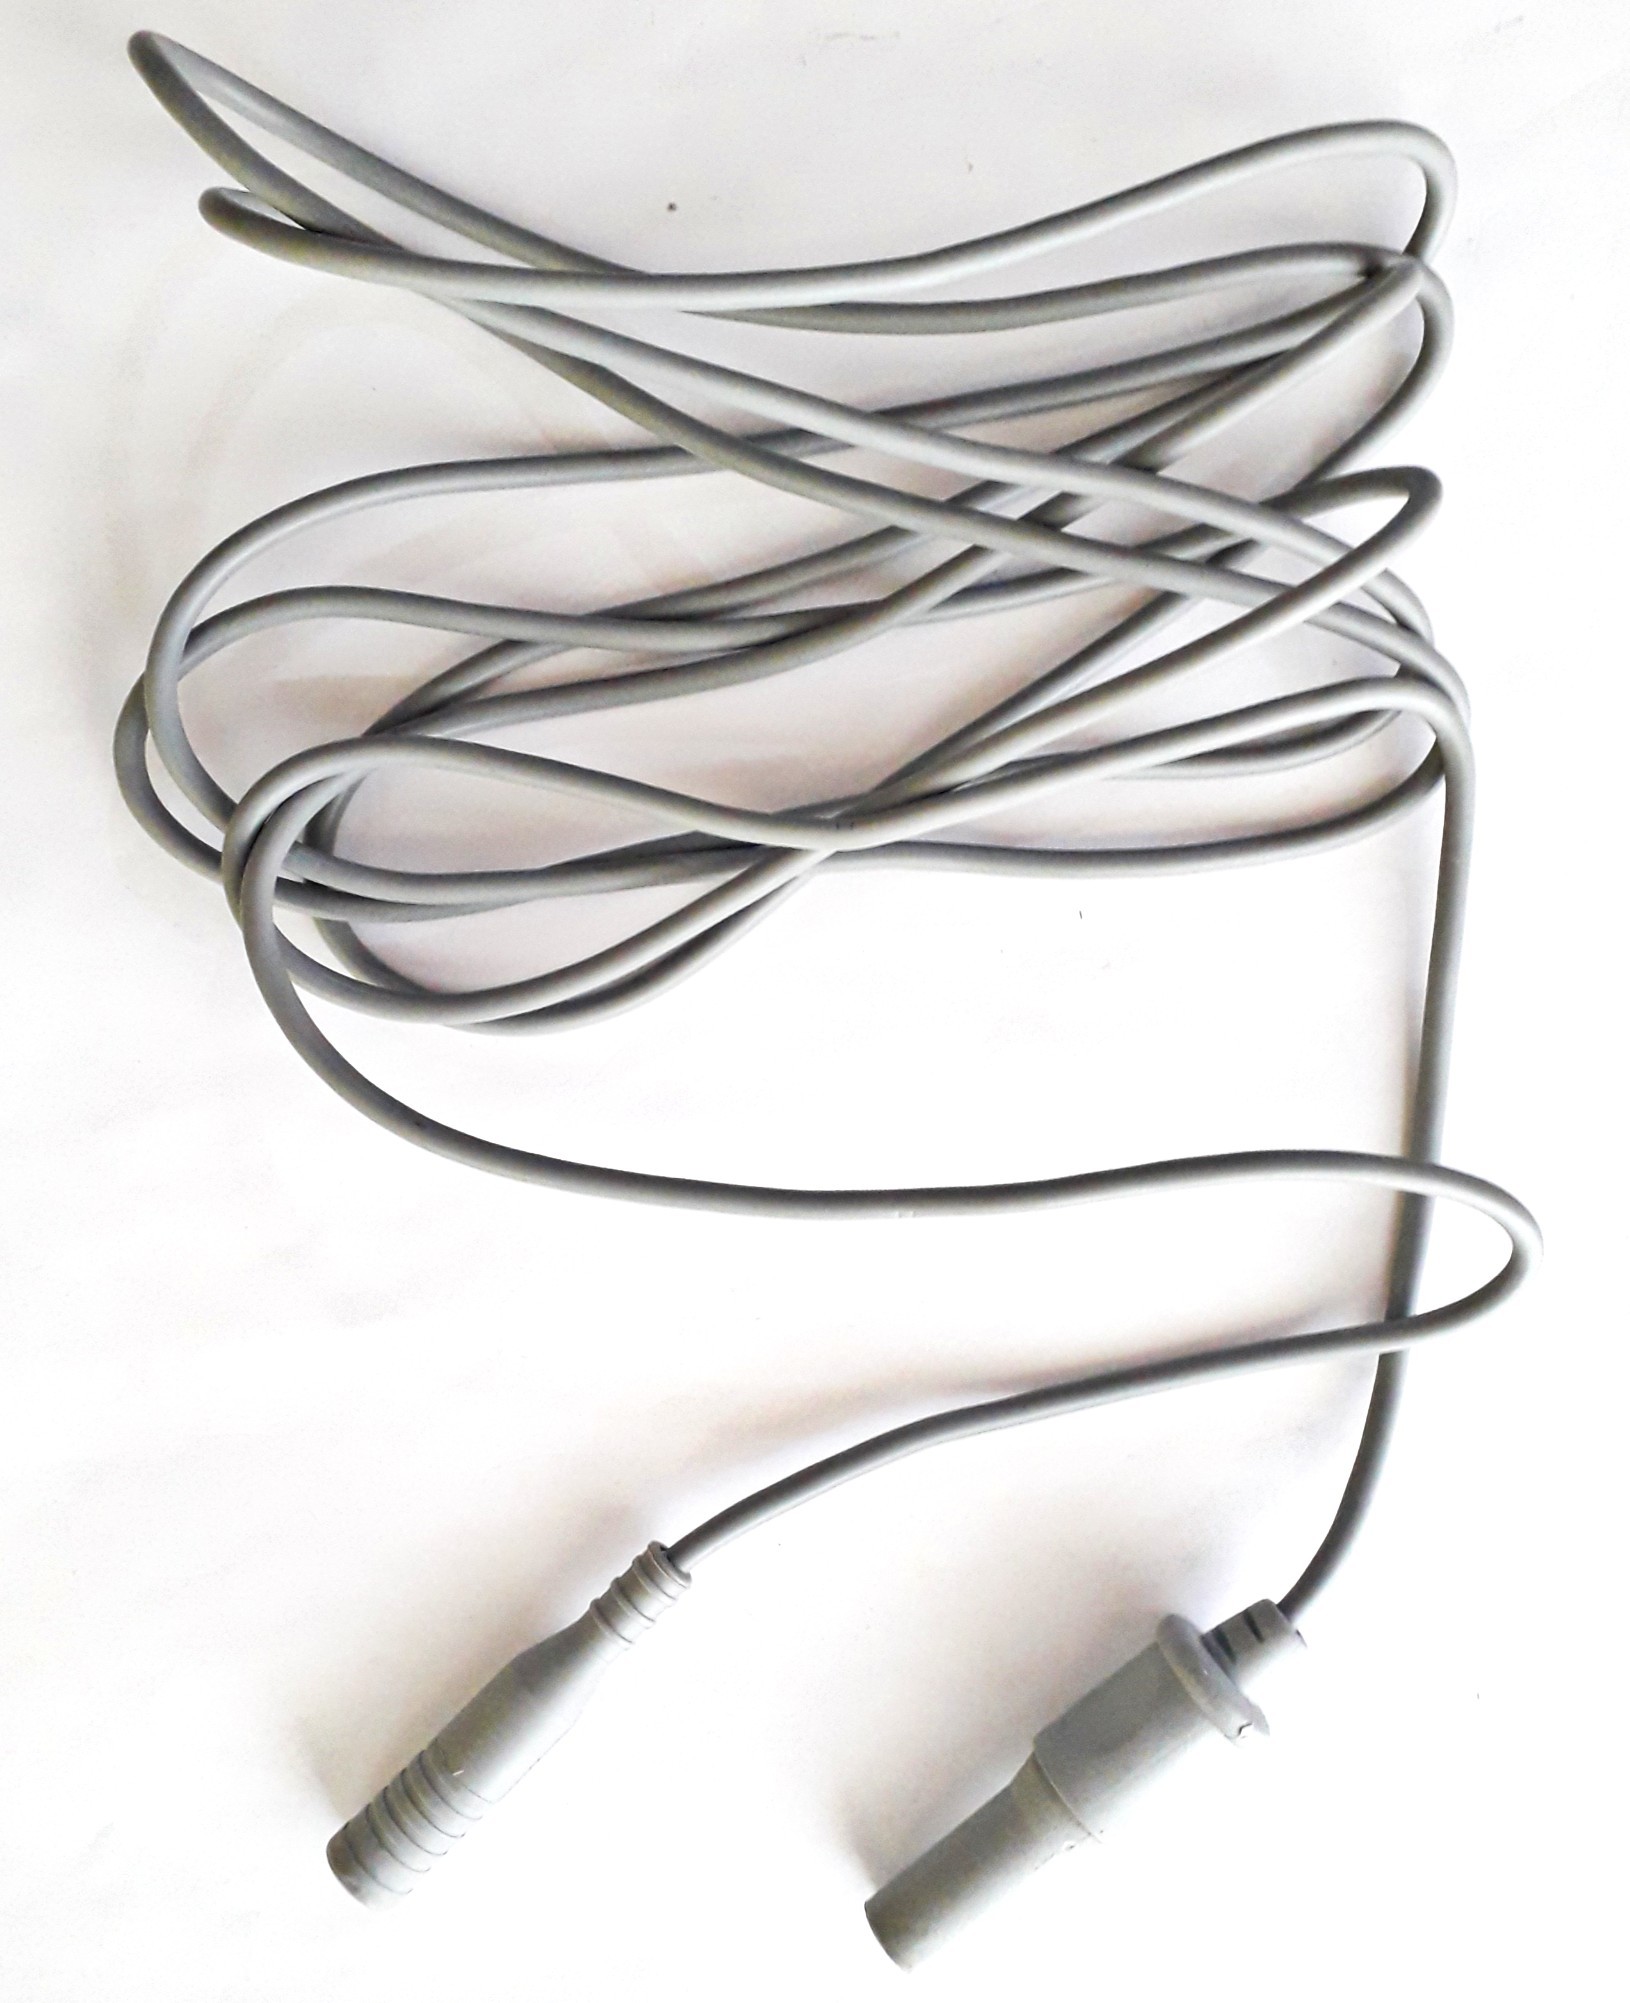 L &T Bipolar Forceps Silicon Cable Cord